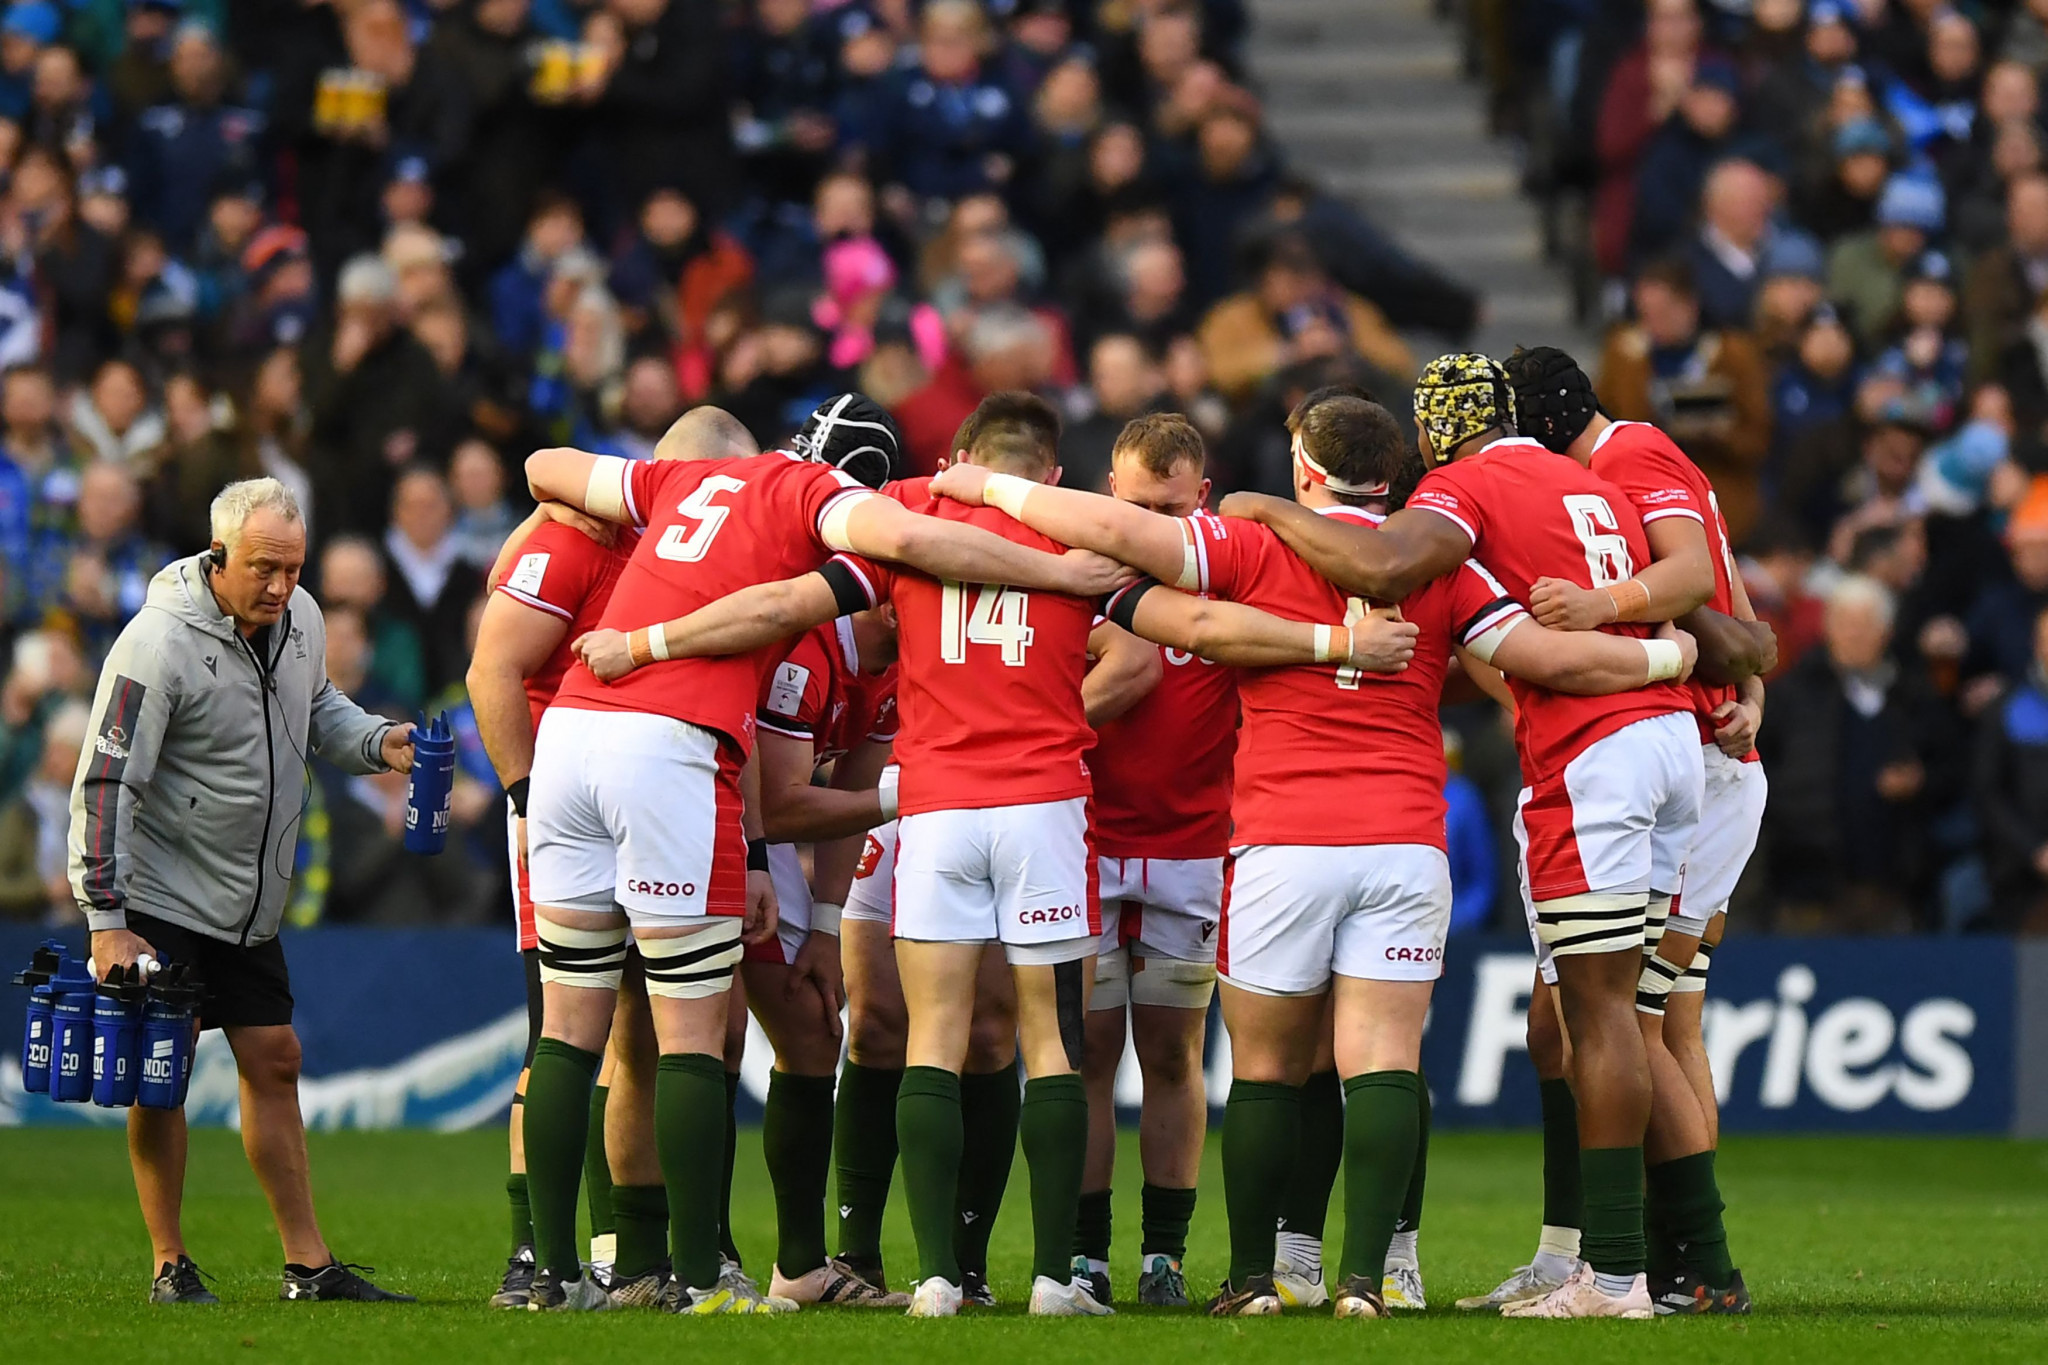 Wales call off Six Nations strike against England after demands met late on